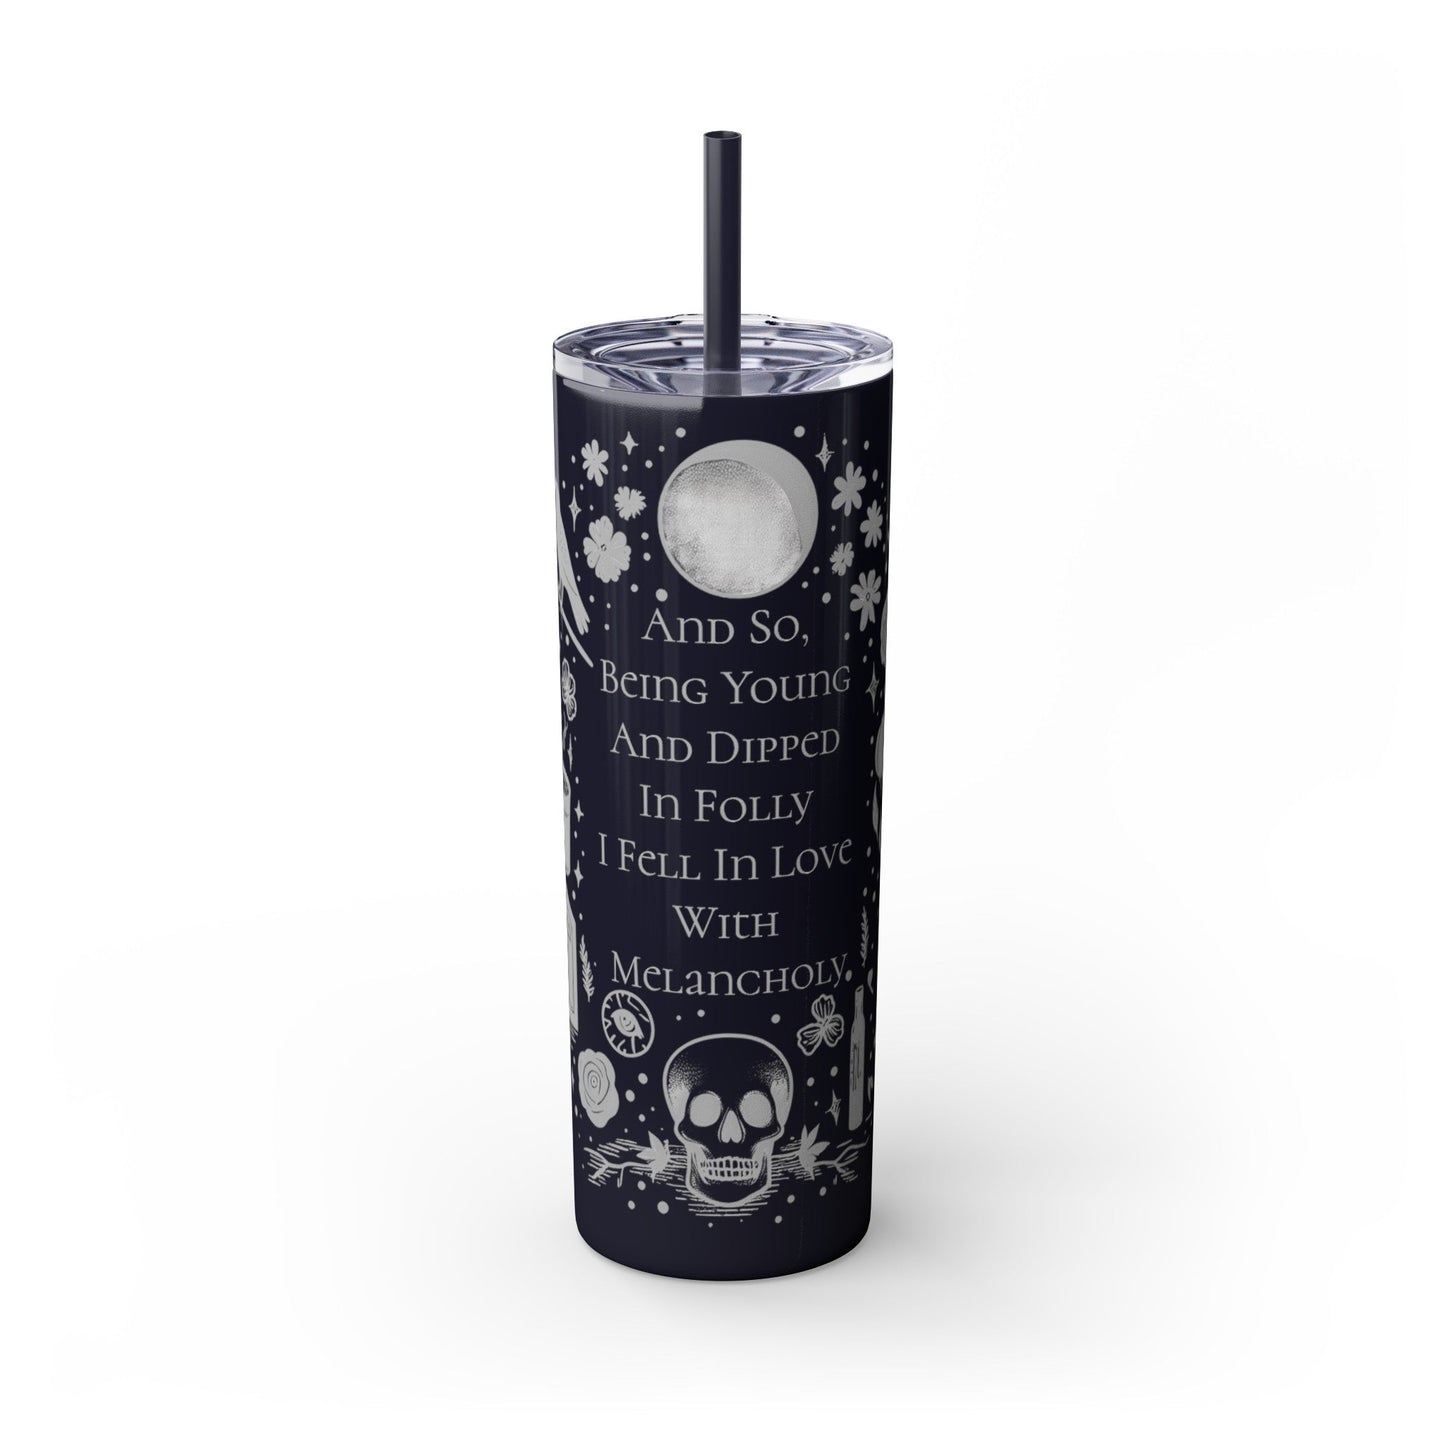 And So Being Young And Dipped In Folly I Fell In Love With Melancholy Skinny Tumbler with StrawMugVTZdesignsGlossyMidnight20oz20 ozBottles & Tumblerscup